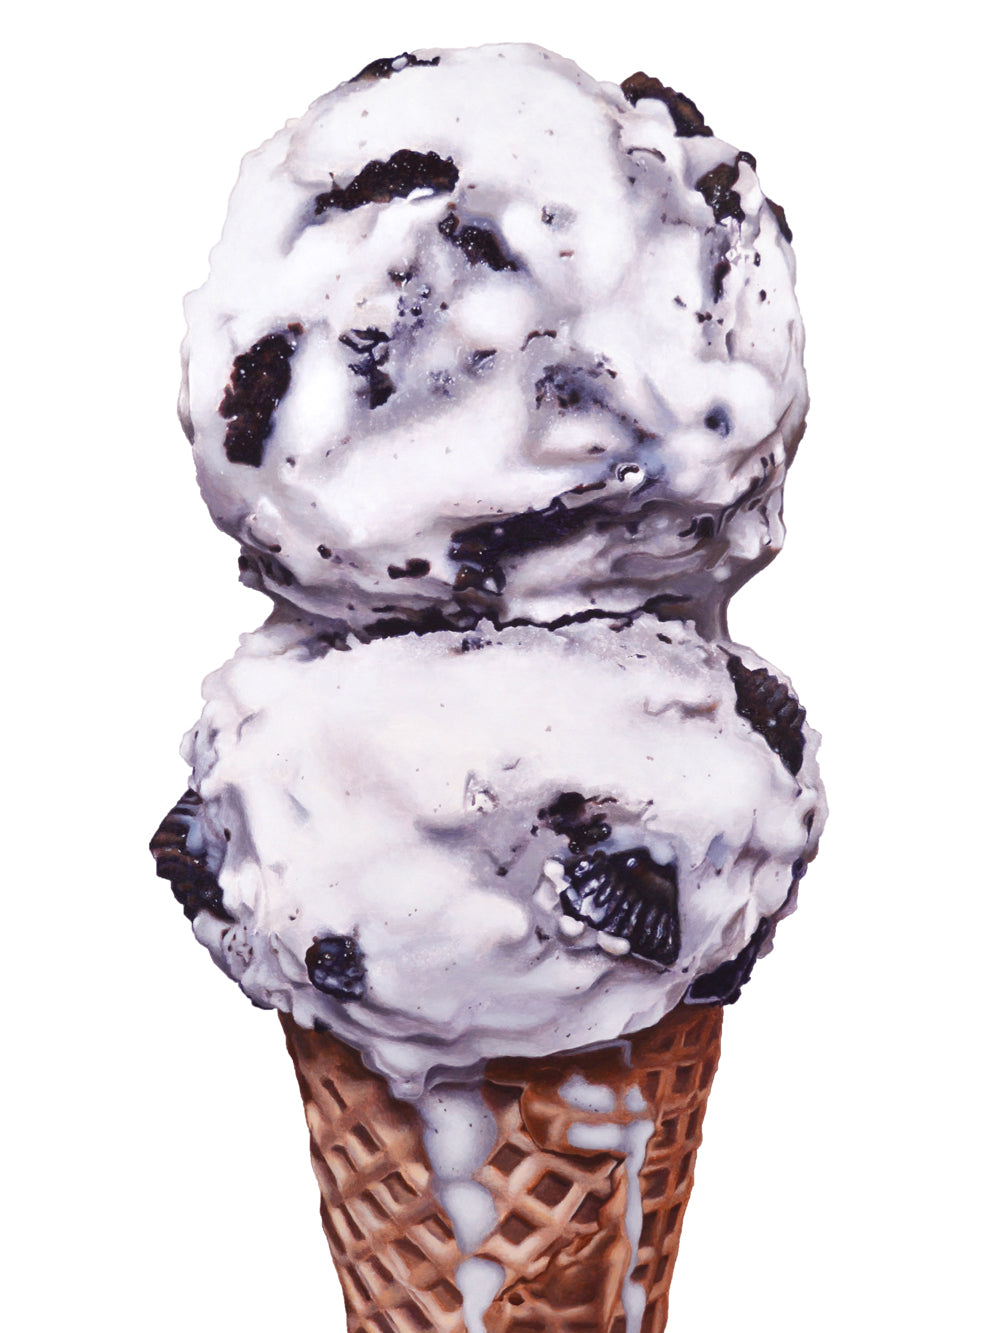 Cookies and Cream 1 Ice Cream Cone Art Print | Limited Edition of 50